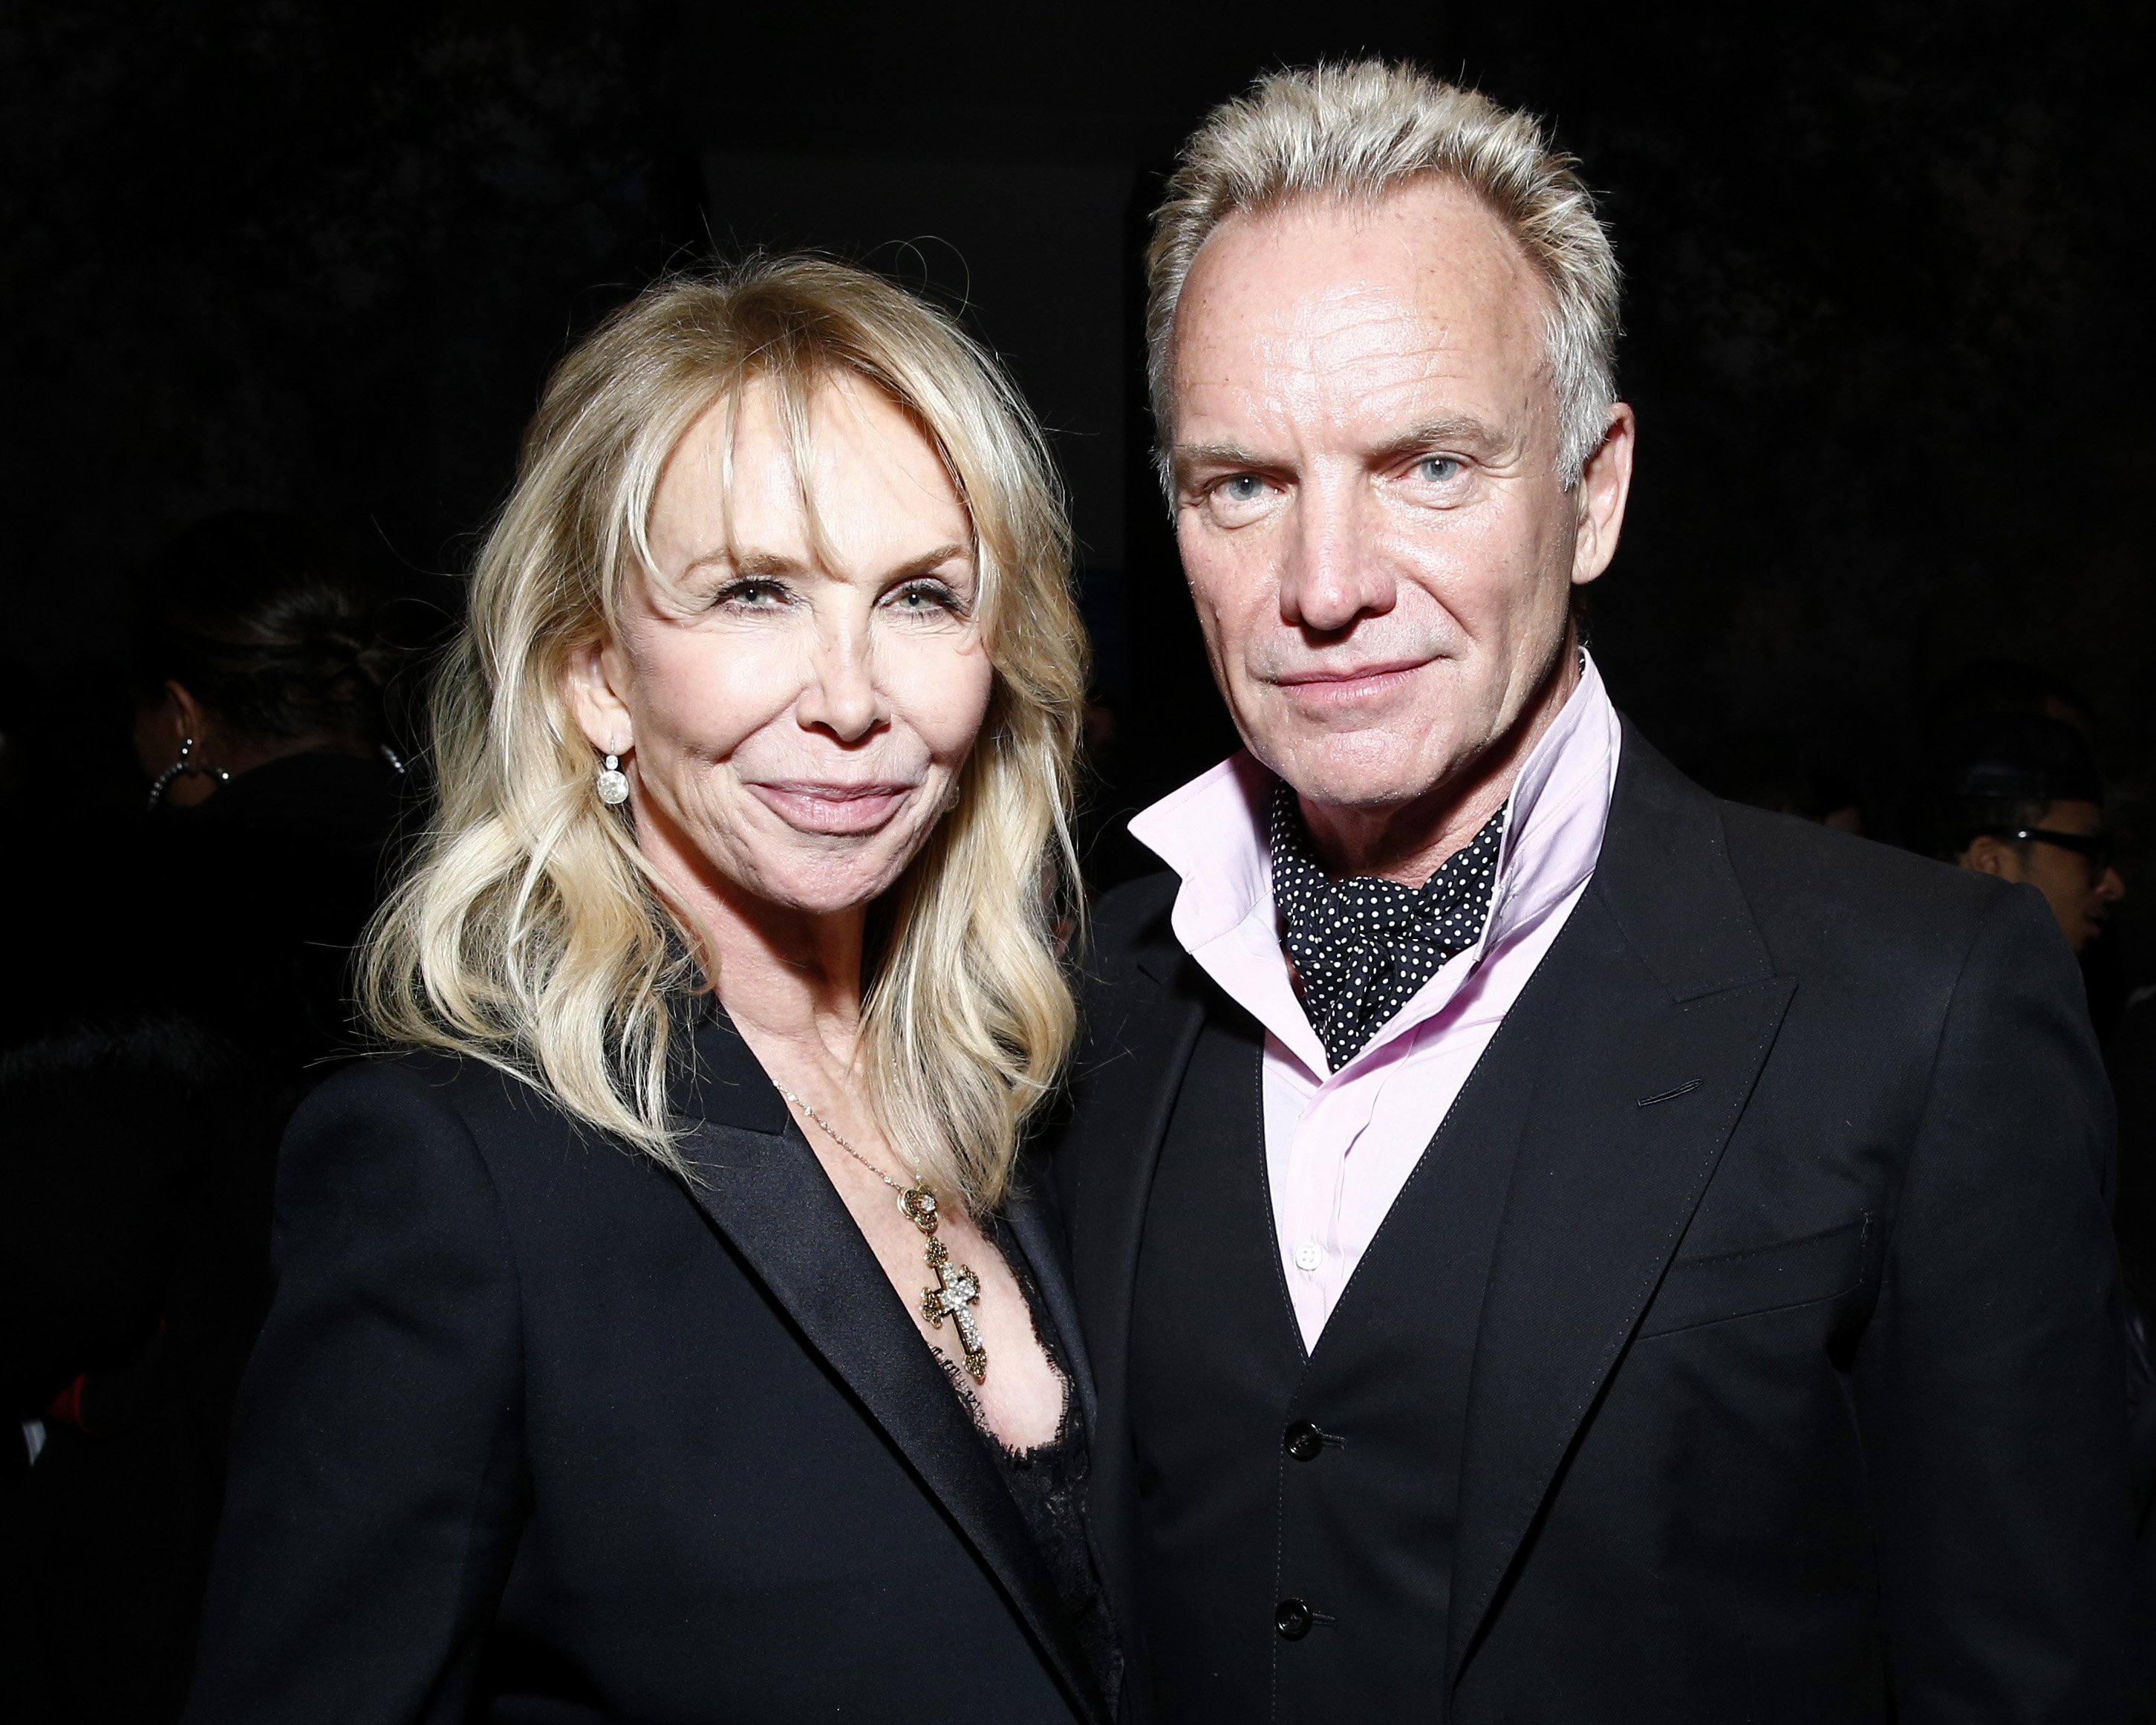 Actress Trudie Styler and musician Sting attend the Universal Music Group's 2018 After Party at Spring Studios on January 28, 2018 in New York City | Photo: Getty Images